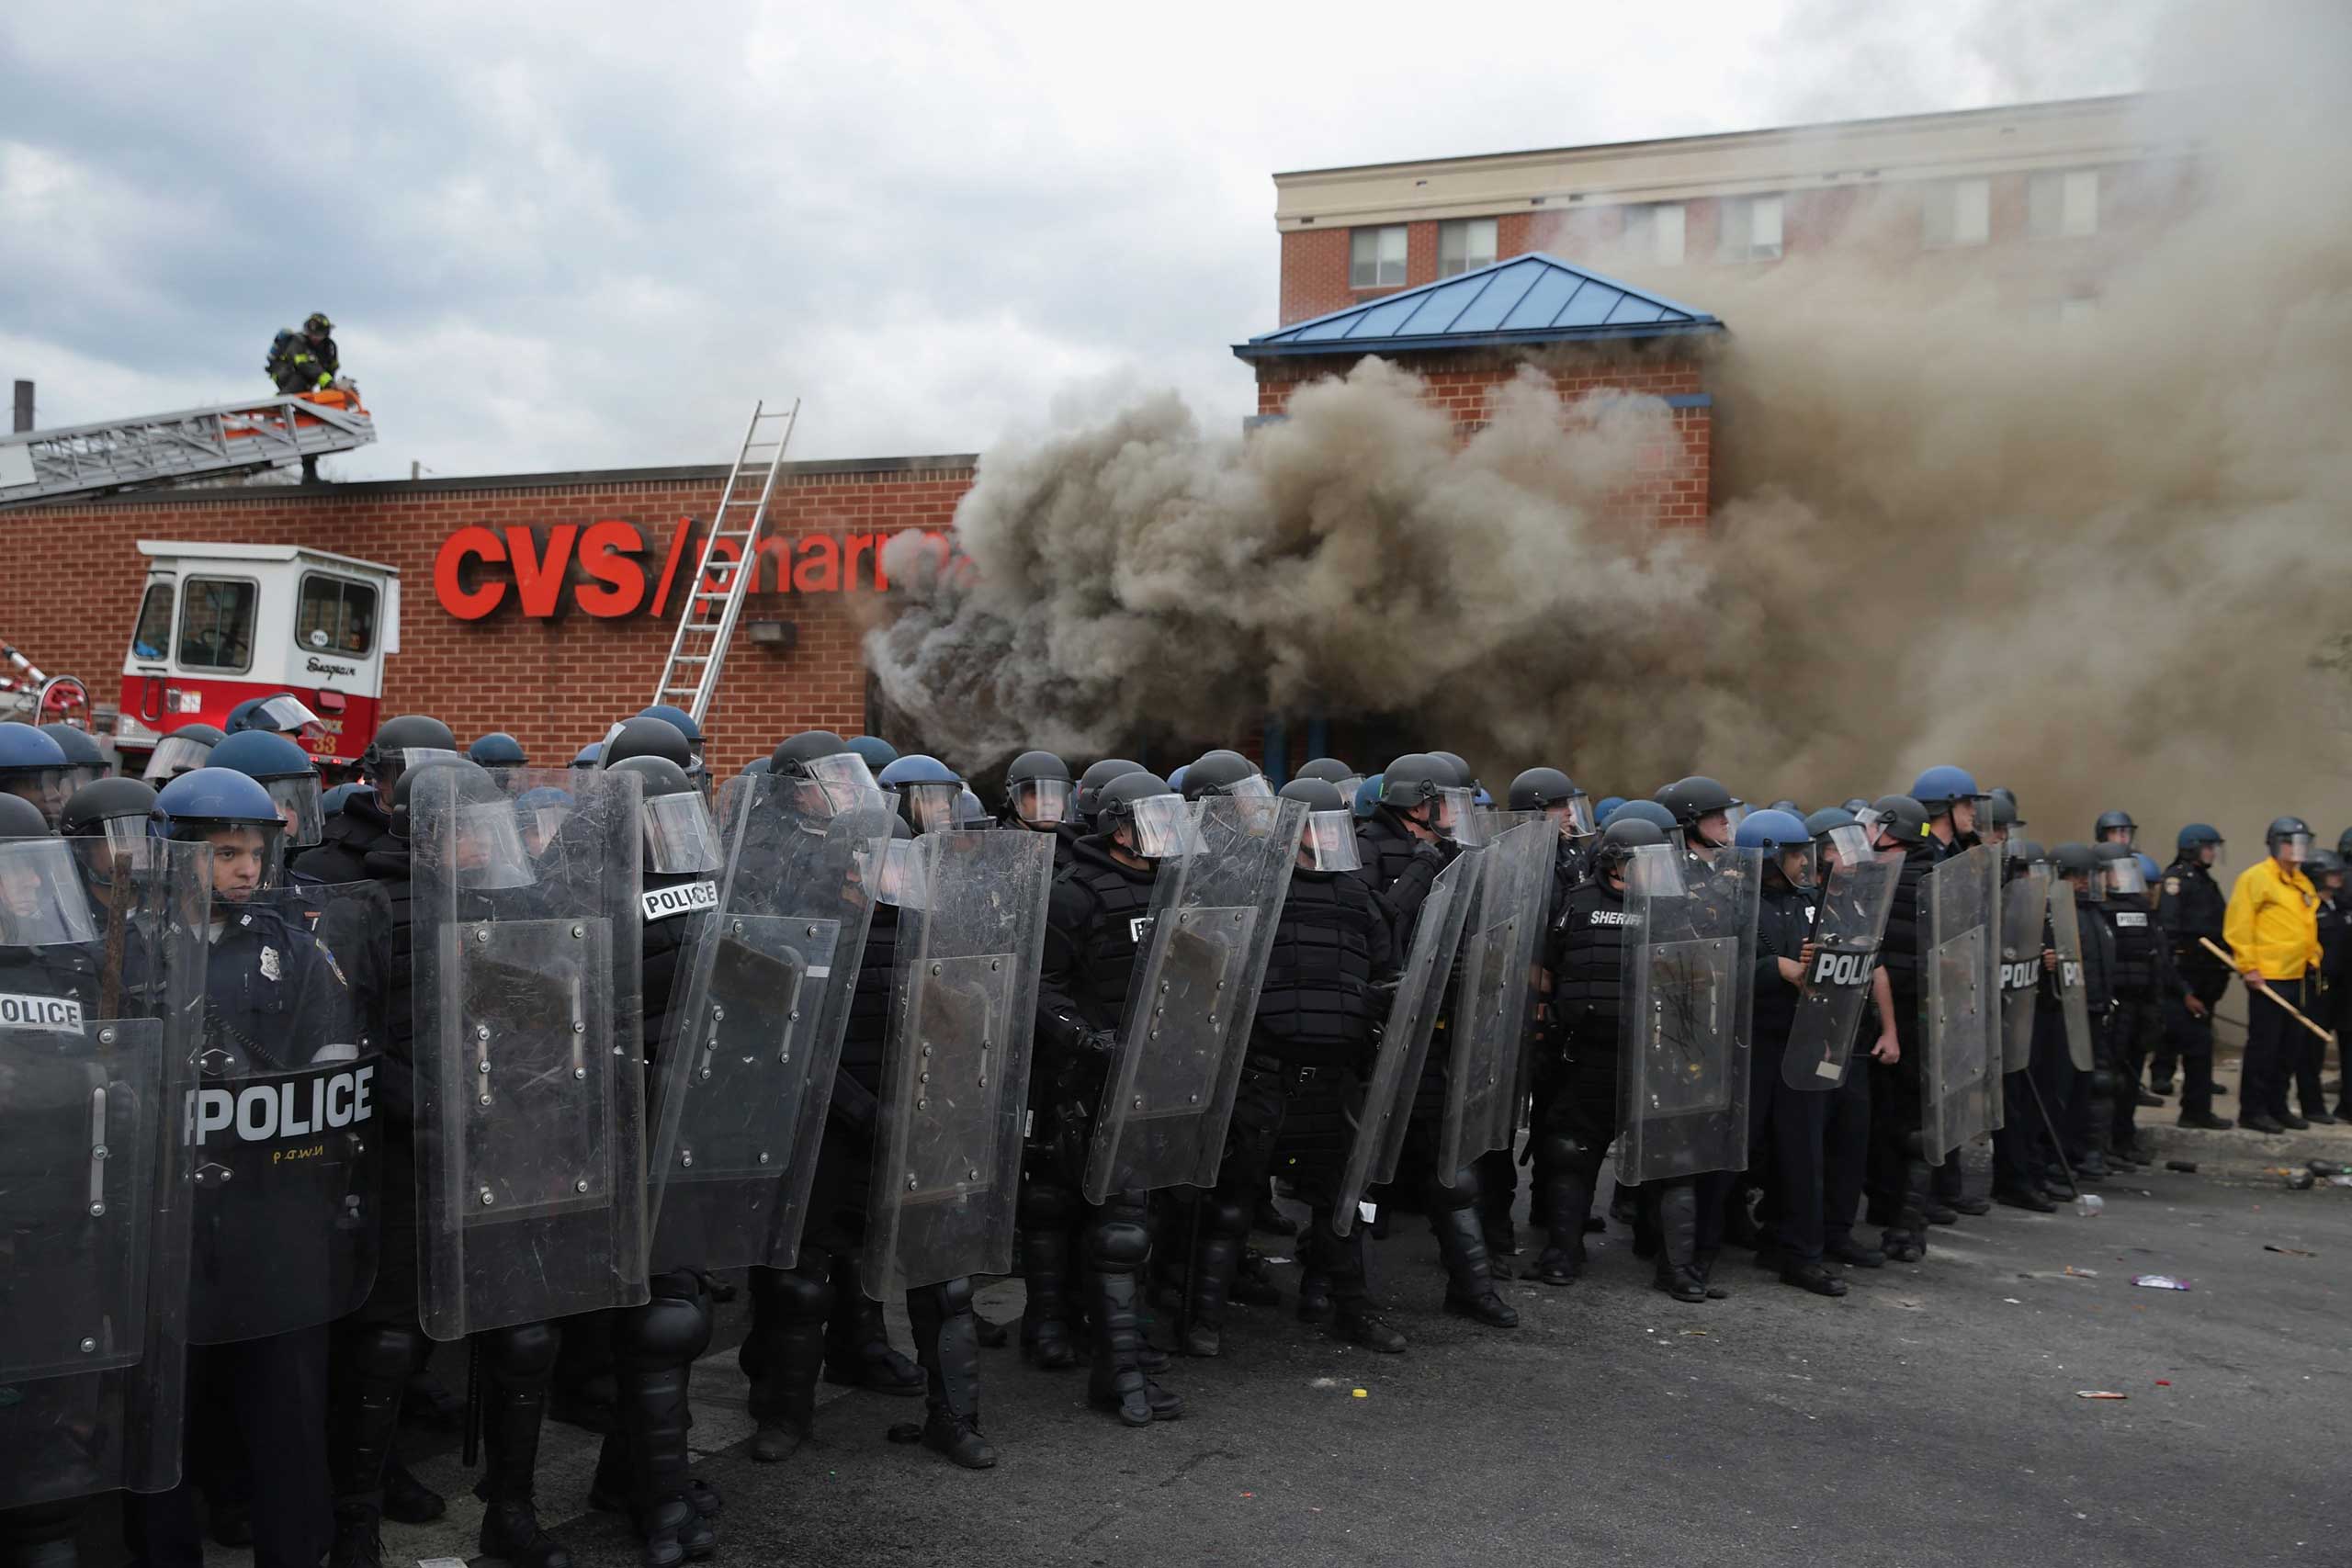 Baltimore Police form a perimeter around a CVS pharmacy that was looted and burned in Baltimore on April 27, 2015. (Chip Somodevilla—Getty Images)